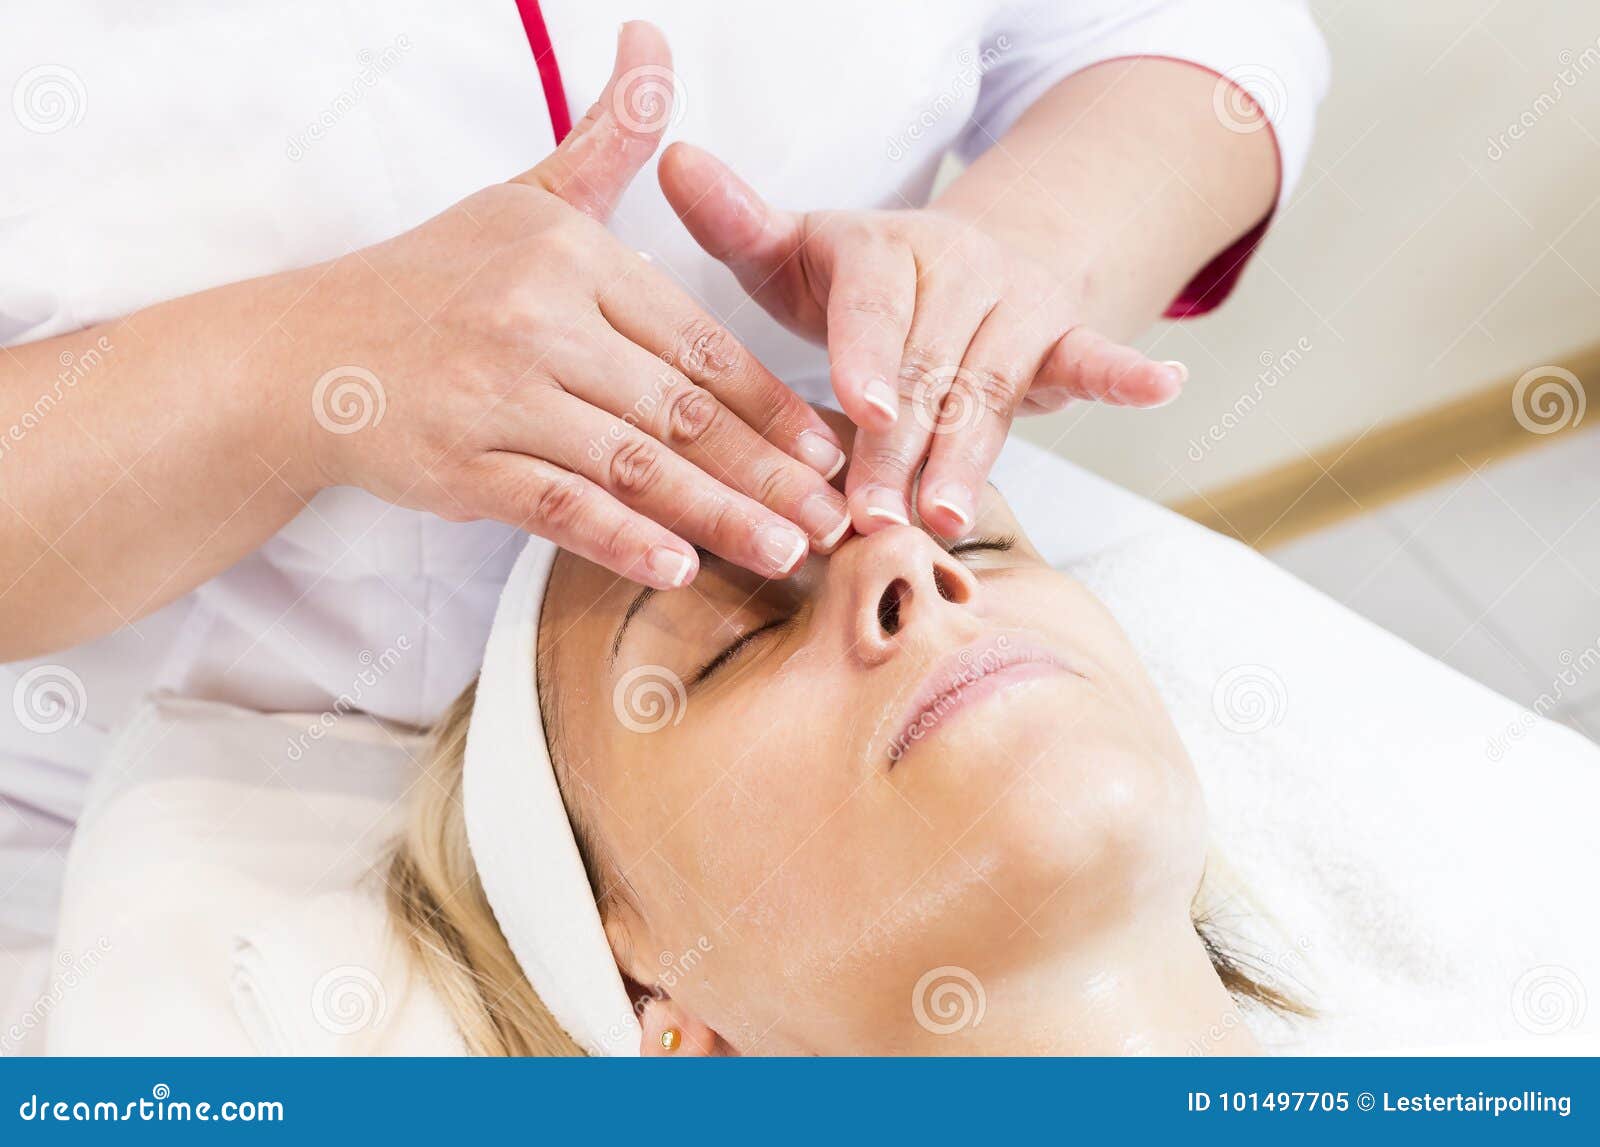 Process Cosmetic Mask Of Massage And Facials Stock Image Image Of